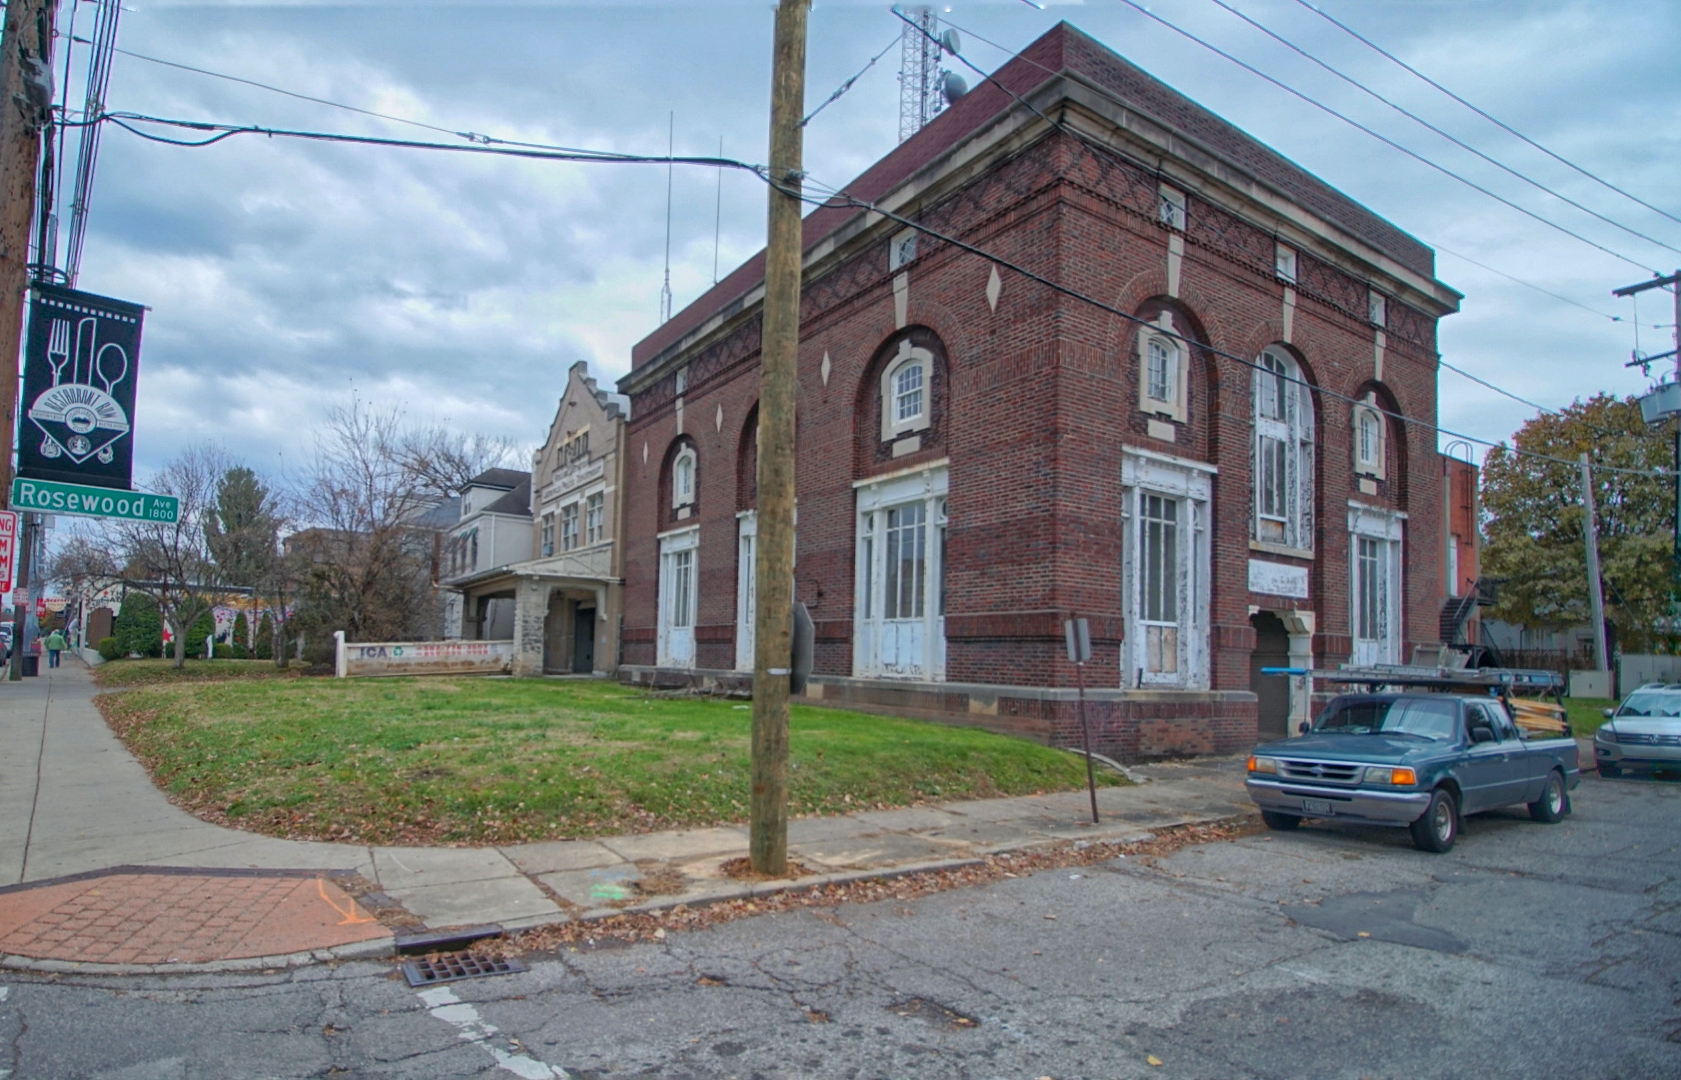 1300-1306 Bardstown is home to a former police headquarters, the Louisville ballet and a Bellsouth switching center. photo by Nick Beckman